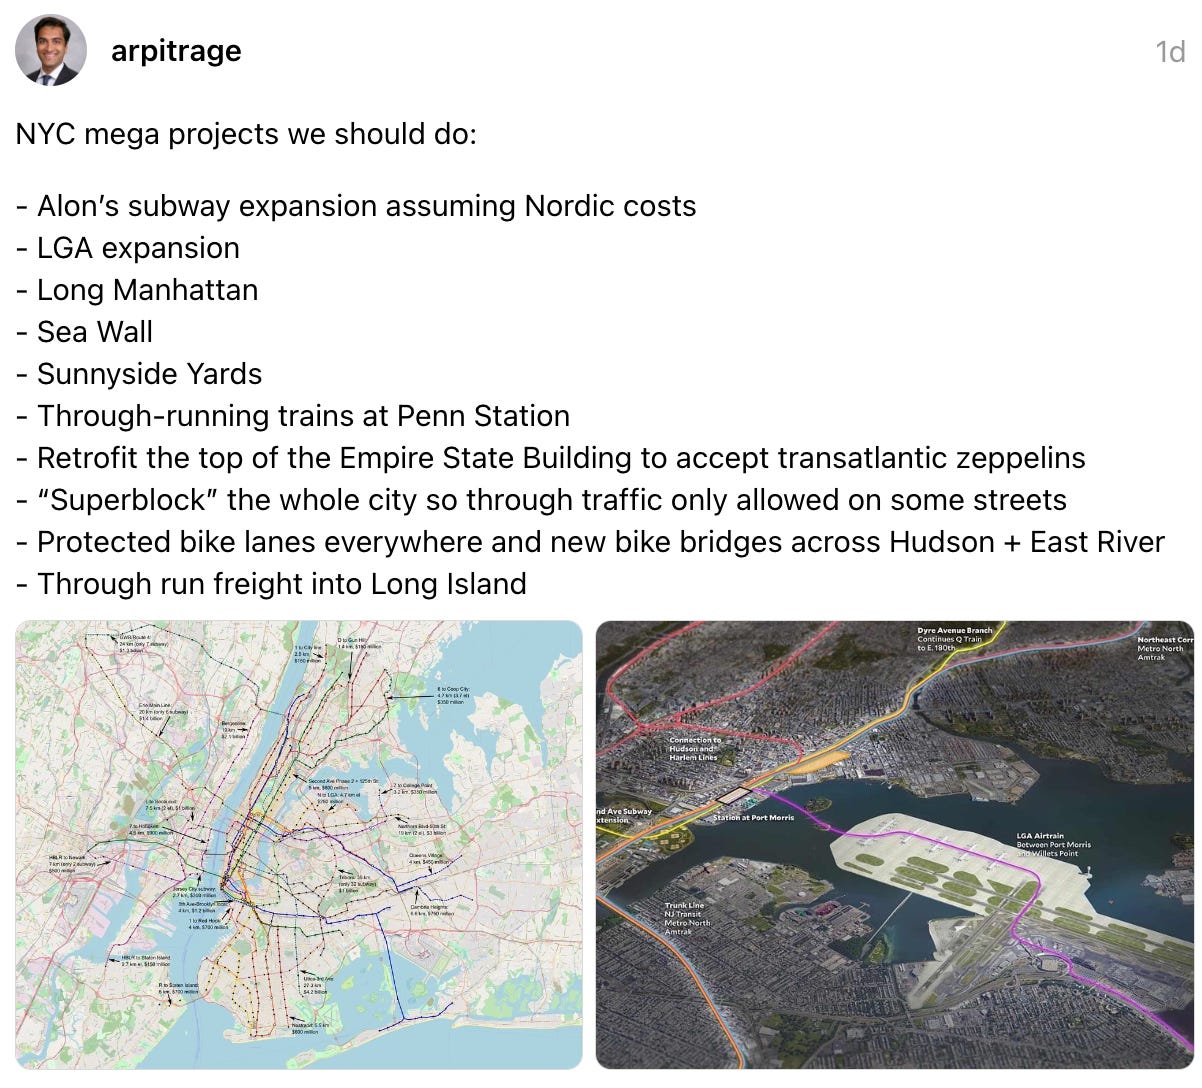 arpitrage 1d NYC mega projects we should do:  - Alon’s subway expansion assuming Nordic costs  - LGA expansion  - Long Manhattan  - Sea Wall  - Sunnyside Yards  - Through-running trains at Penn Station - Retrofit the top of the Empire State Building to accept transatlantic zeppelins  - “Superblock” the whole city so through traffic only allowed on some streets  - Protected bike lanes everywhere and new bike bridges across Hudson + East River  - Through run freight into Long Island